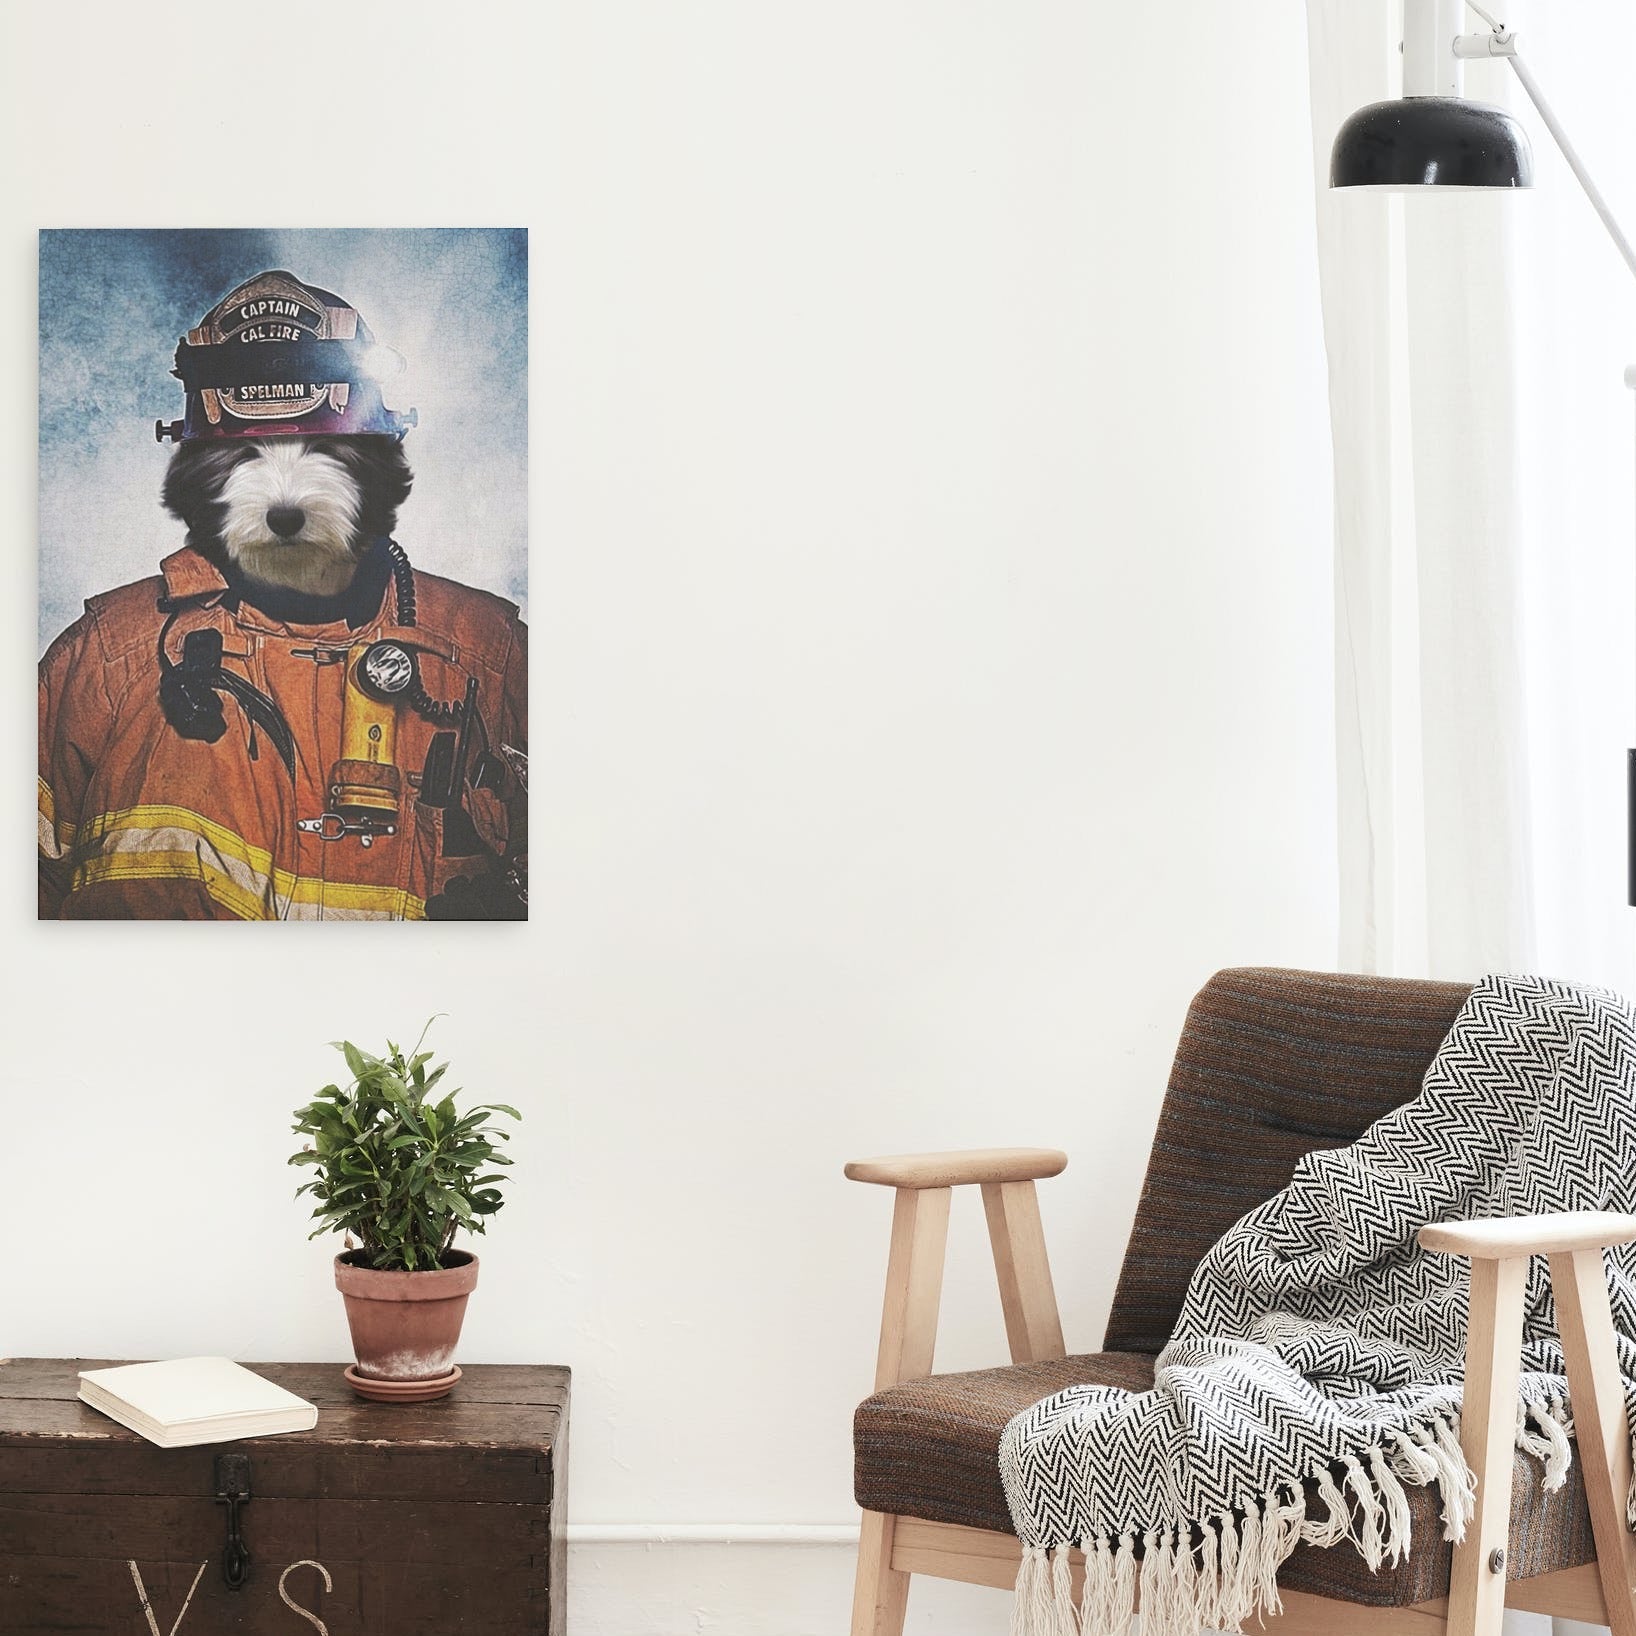 Firefighter II - Unique Canvas Of Your Pet